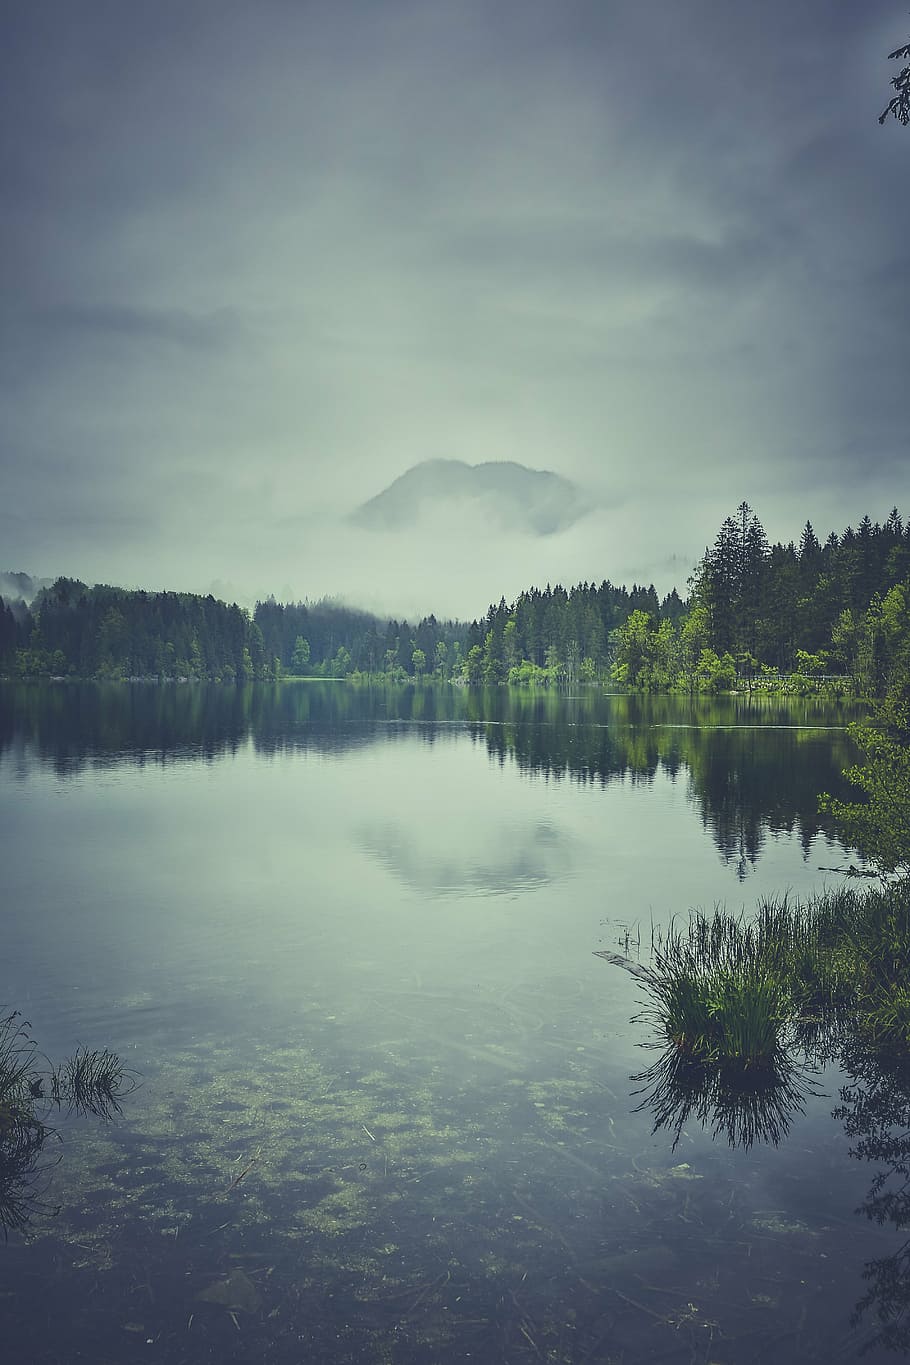 body, water, surrounded, pine trees, photography, trees, smoky, mountain, background, green